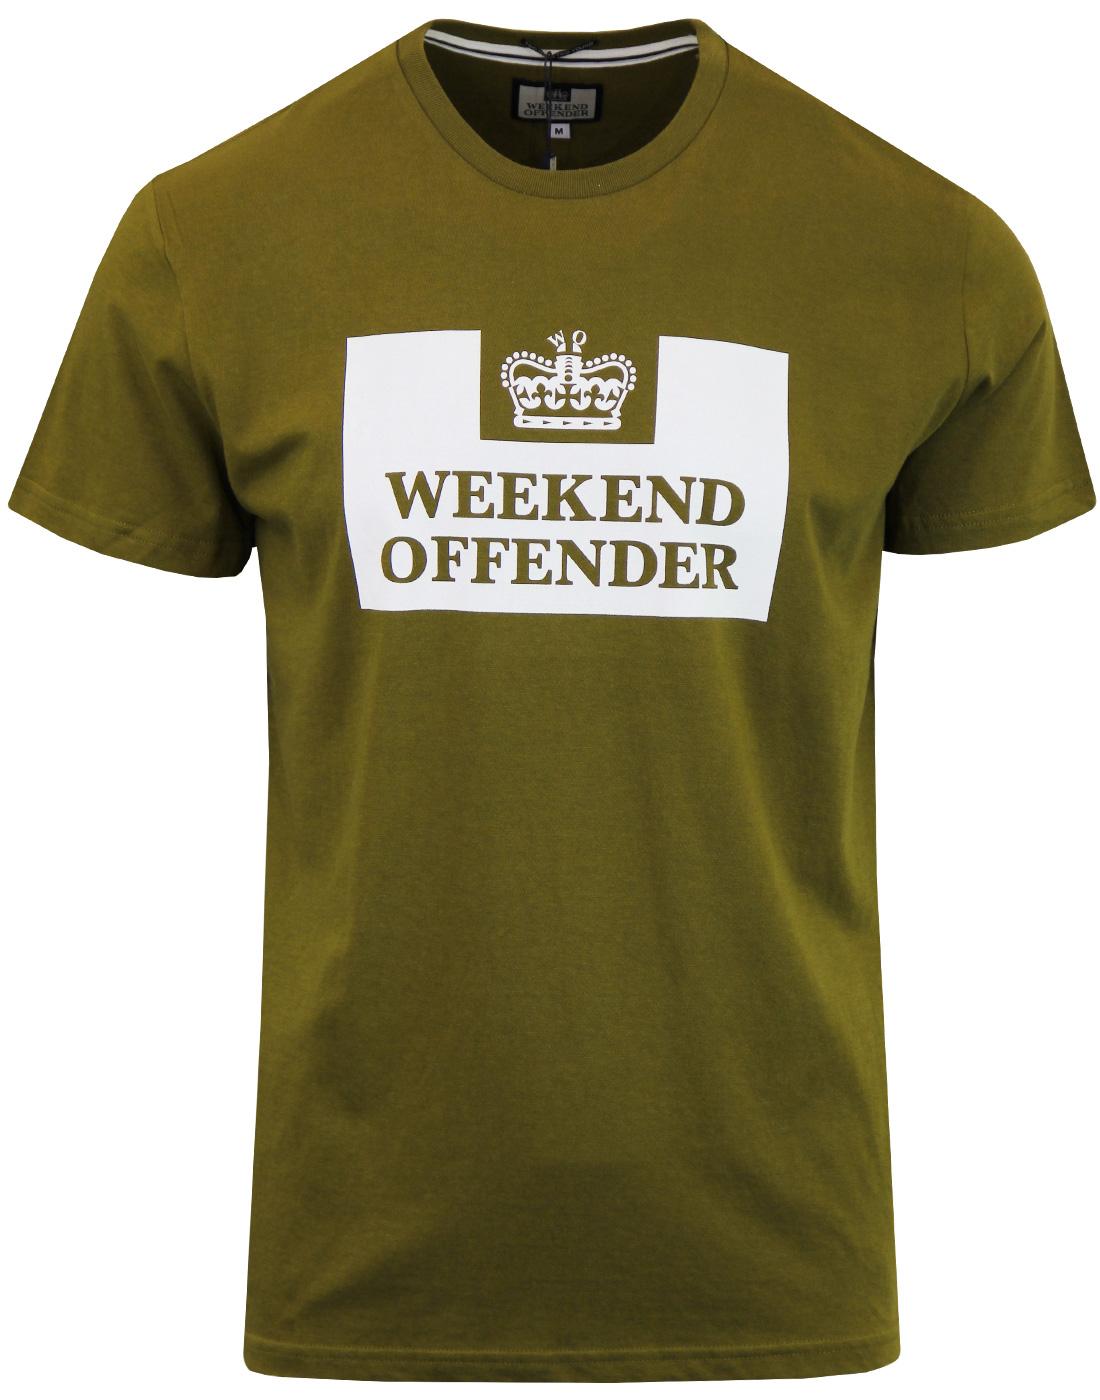 WEEKEND OFFENDER Retro Casuals Prison T-shirt (O)